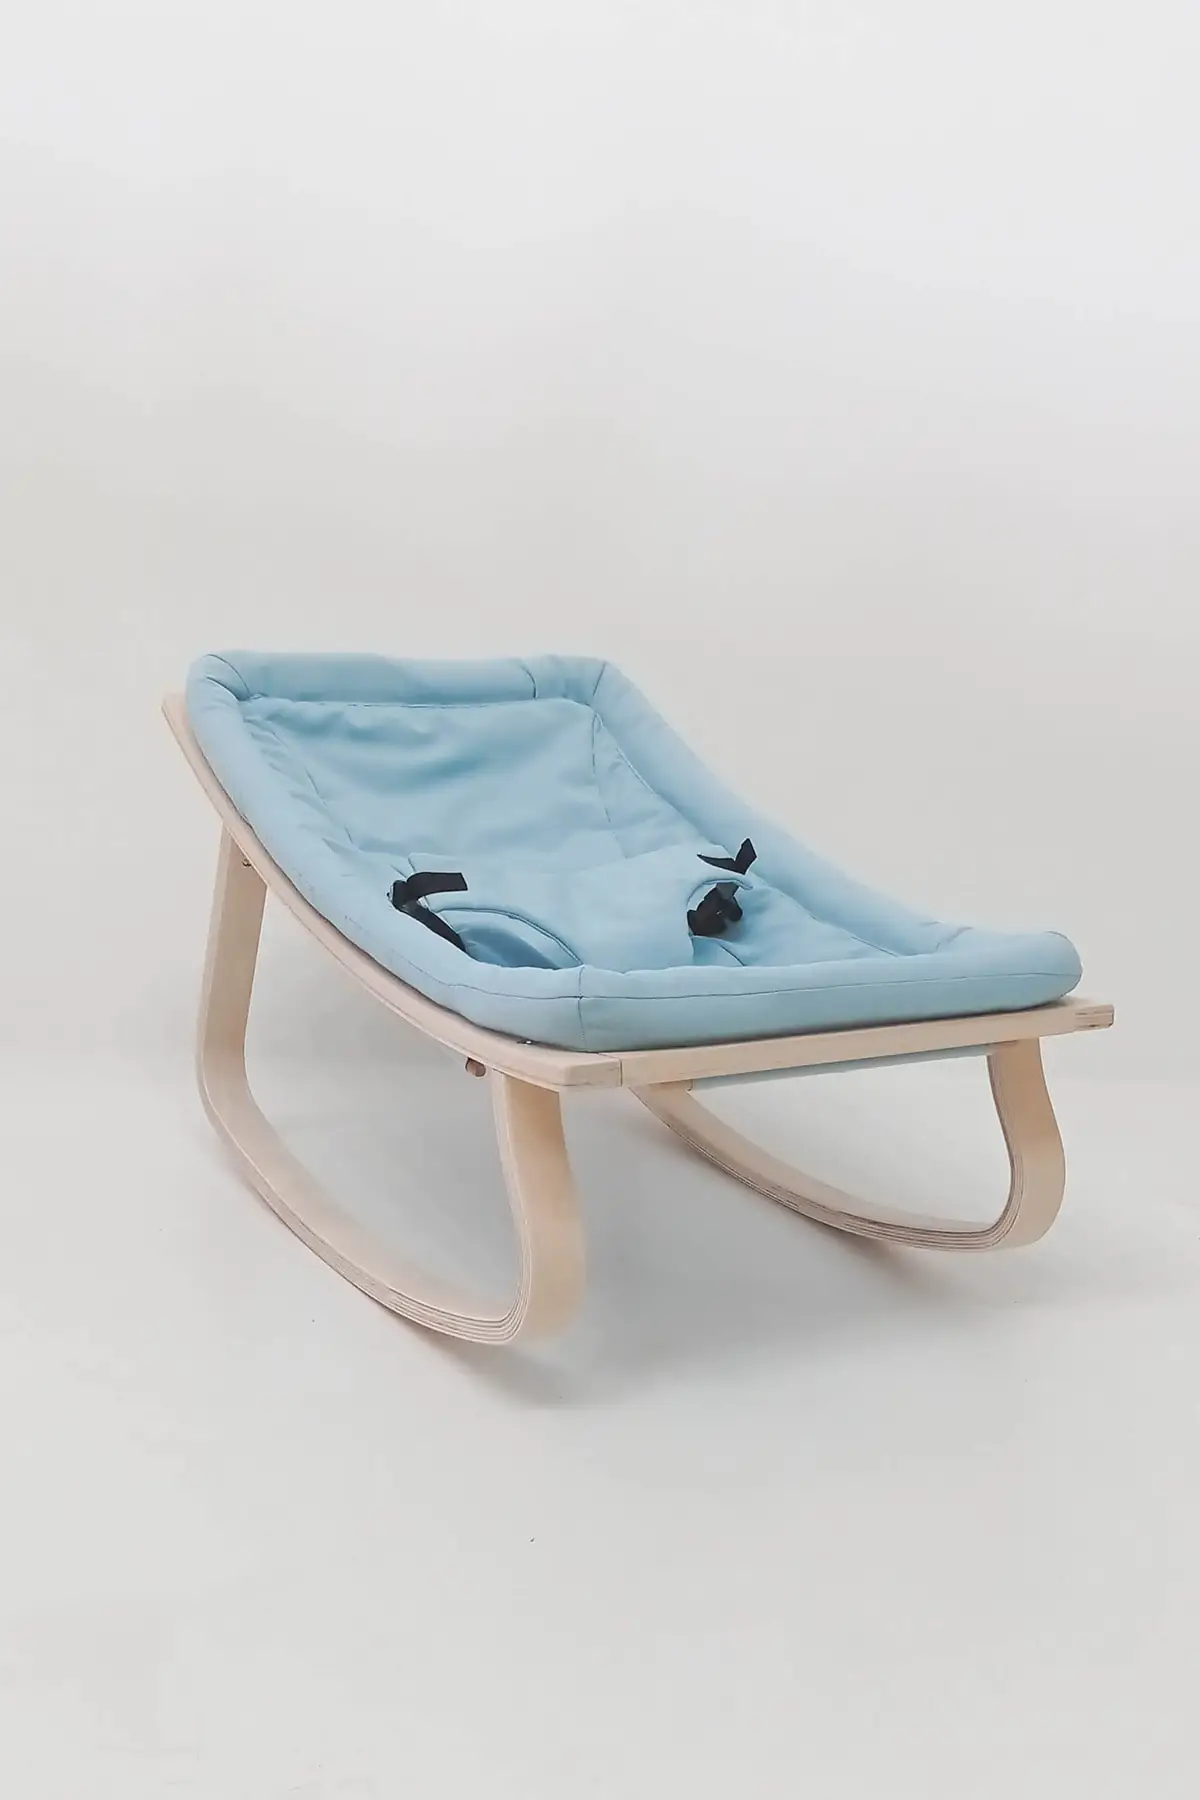 

Natural Wood Rocking Baby Bed Baby Cradle Rocking Chair Rocking Baby 0-36 Months Swing Soothing Durable Cradle Star New Natural Wooden Cot Nursery Ergonamic Natural Nest Bed Swing Seat Cotton Fabric Chaise Longue Main